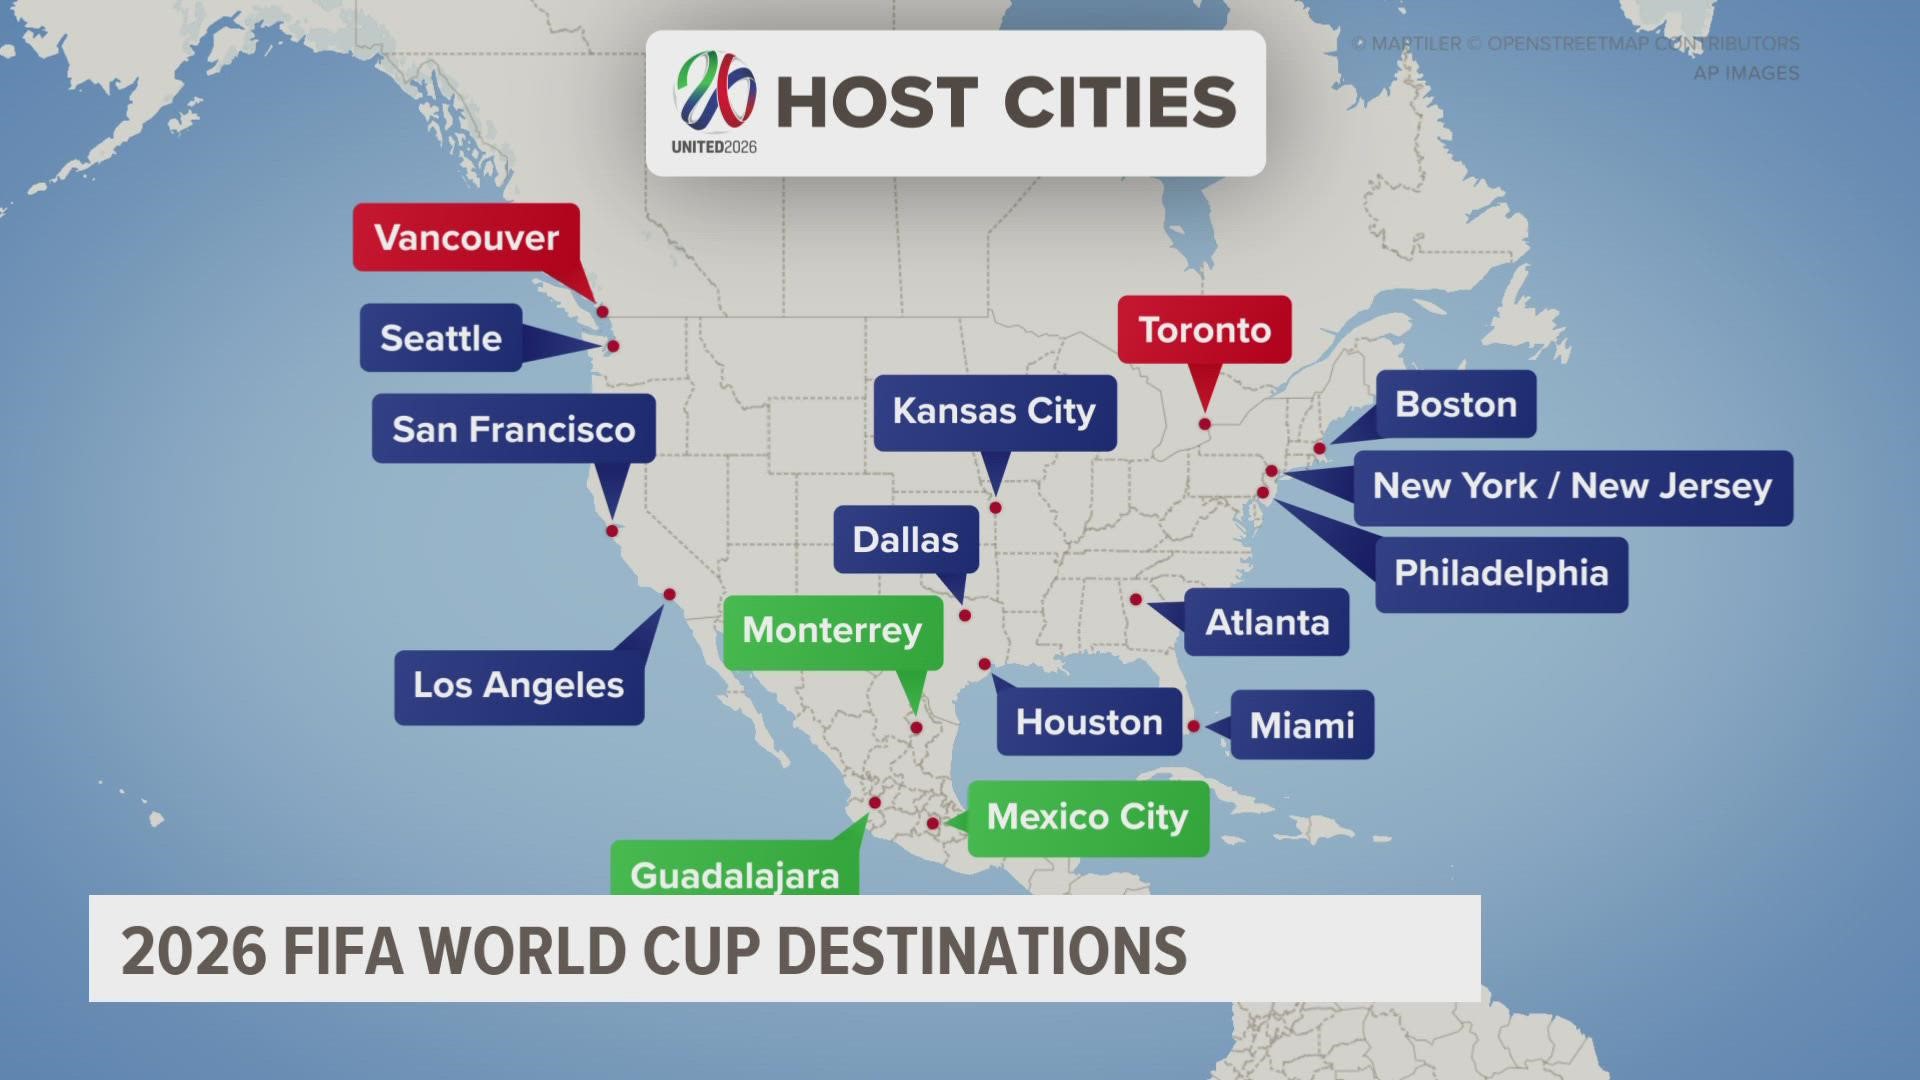 11 U.S. cities were selected to host games.